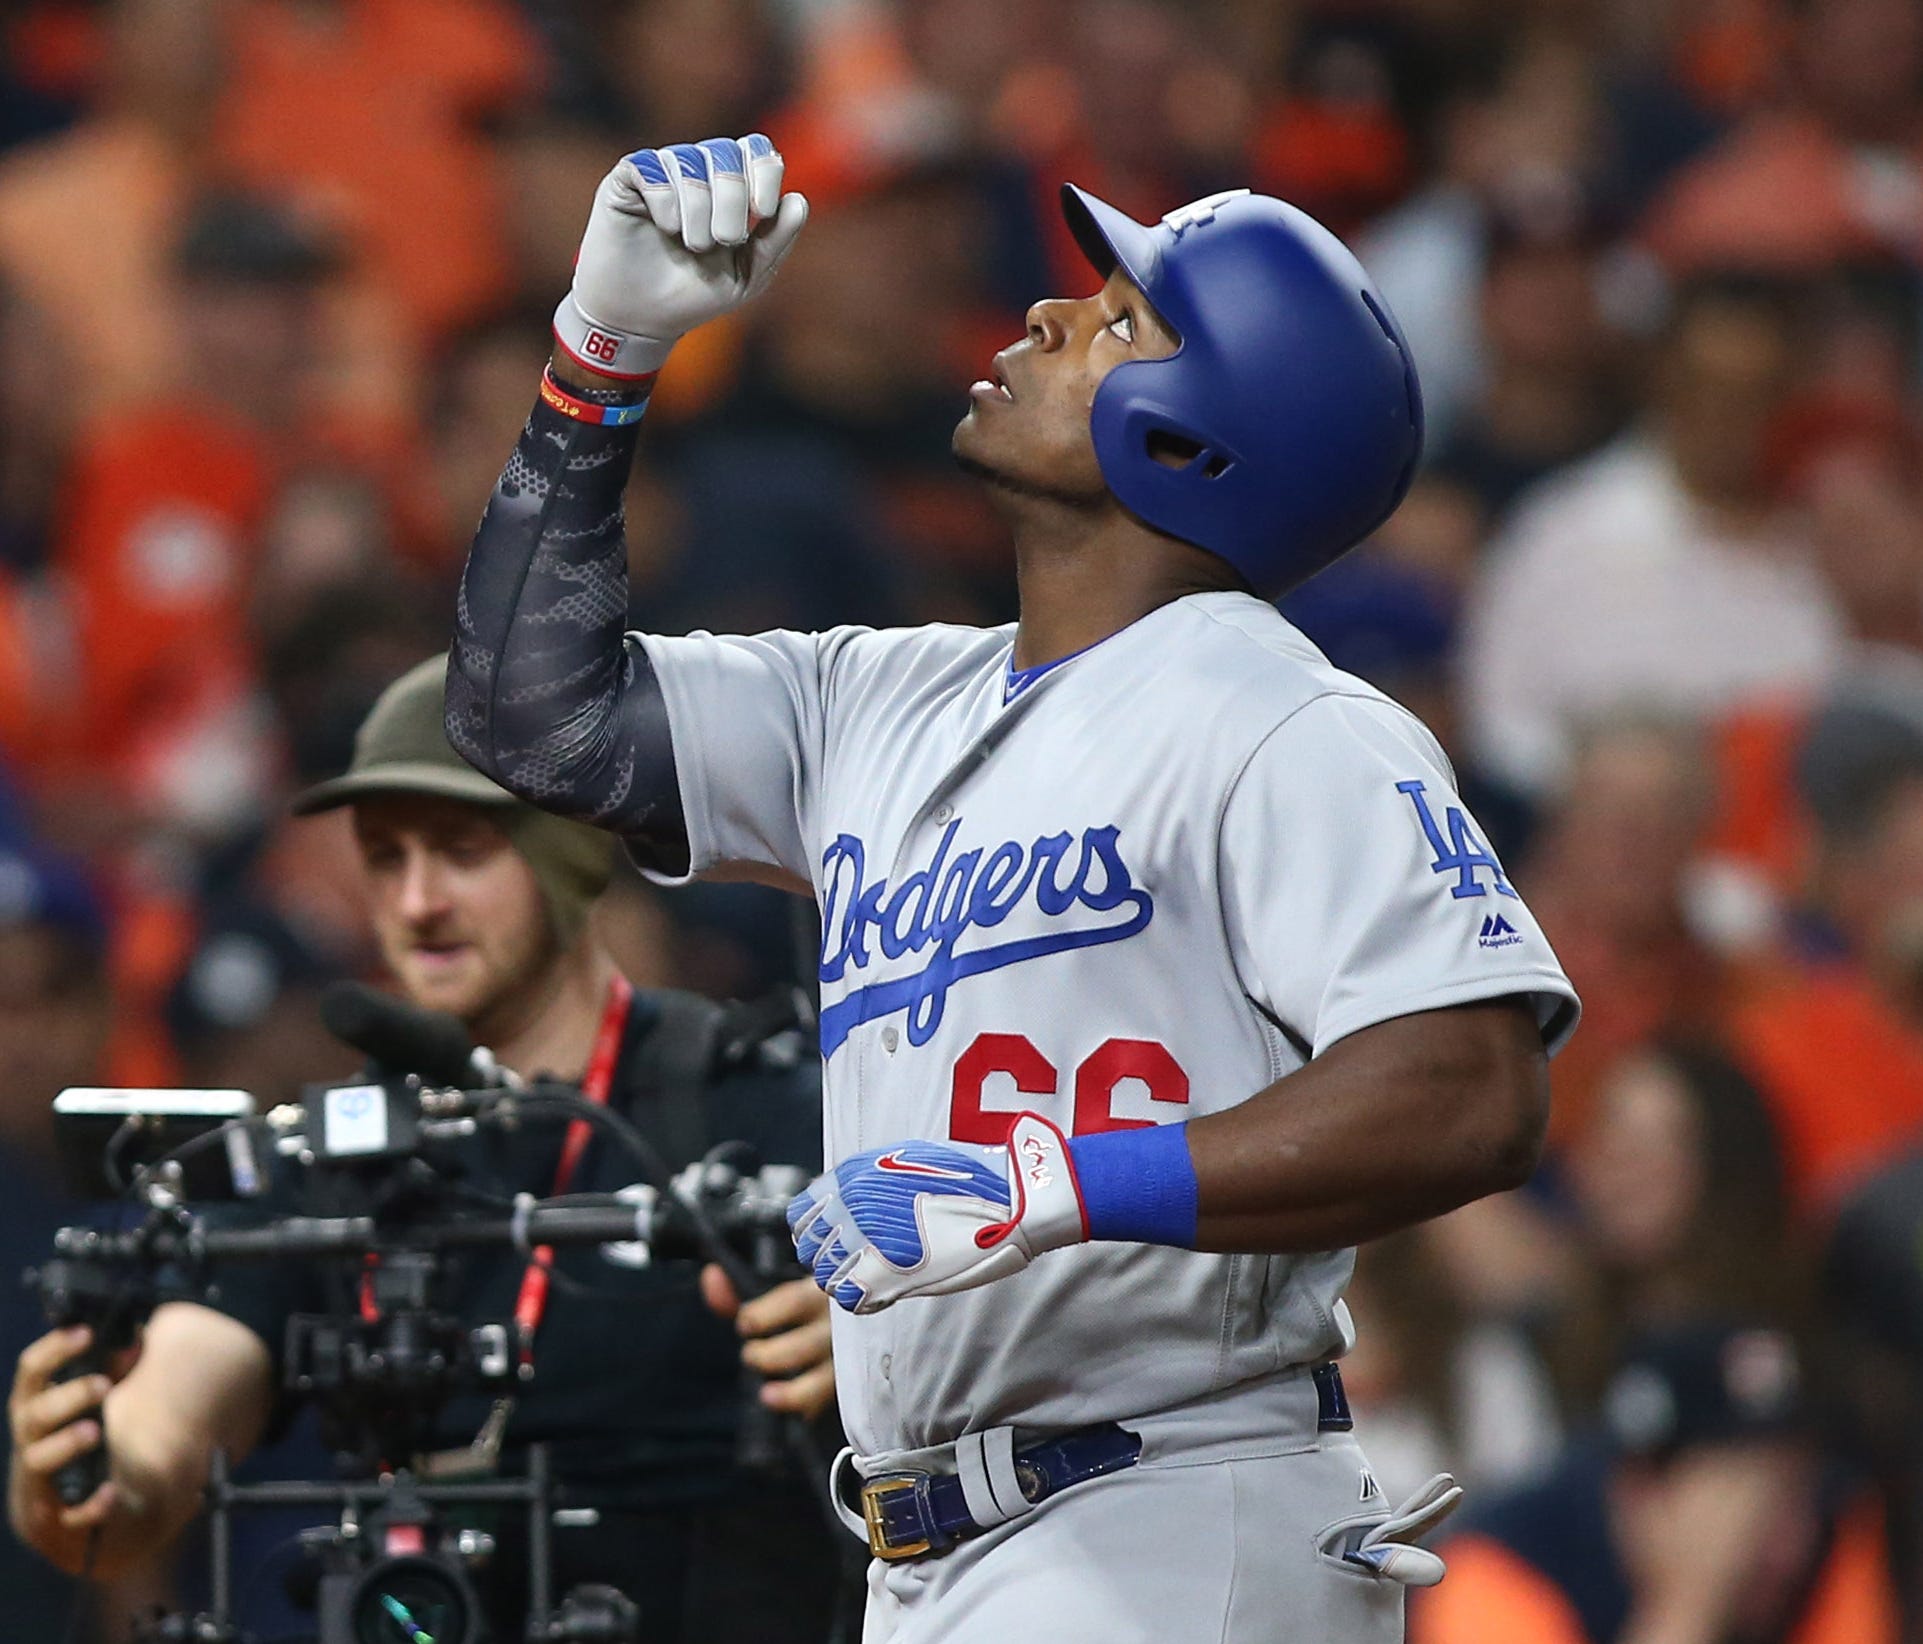 Yasiel Puig points to the sky after hitting a two-run home run in the ninth inning.